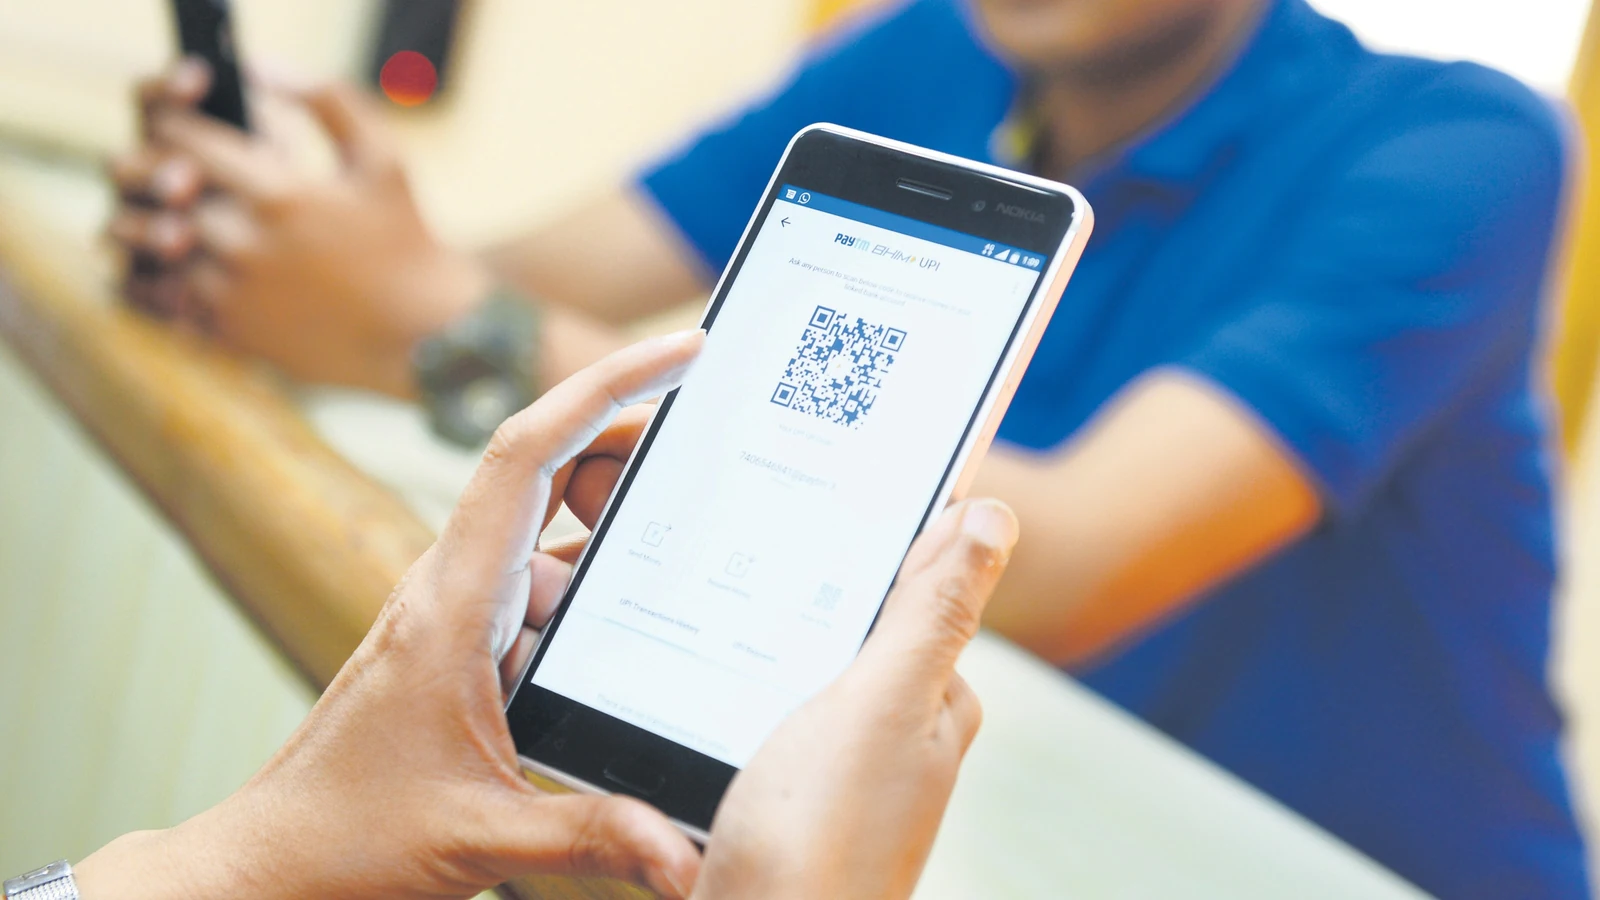 Do you use UPI for payments? Follow these tips by SBI for safe transactions